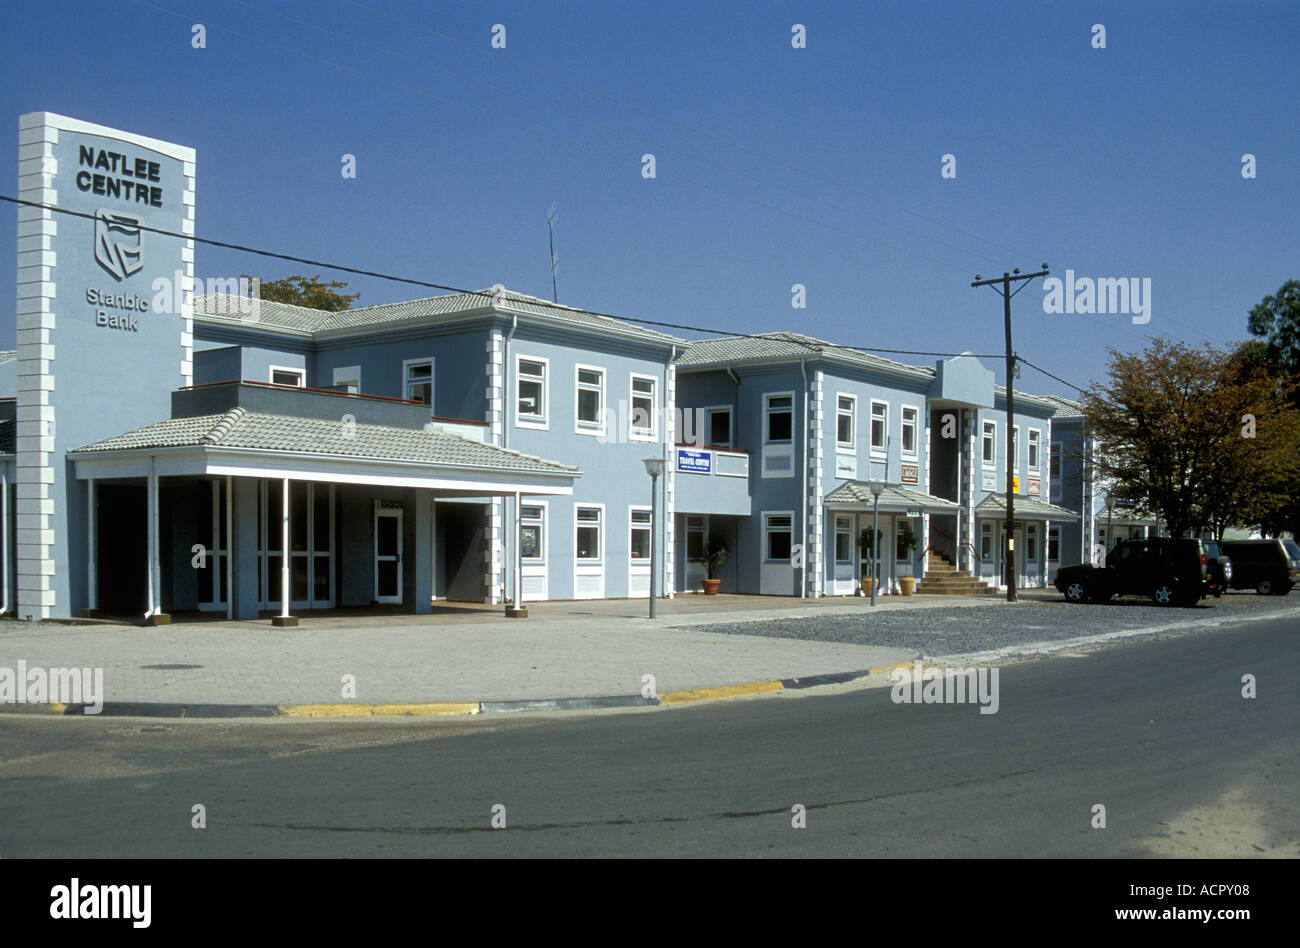 Natlee Shopping Centre and Stanbic Bank near the airport Maun Botswana southern Africa Stock Photo